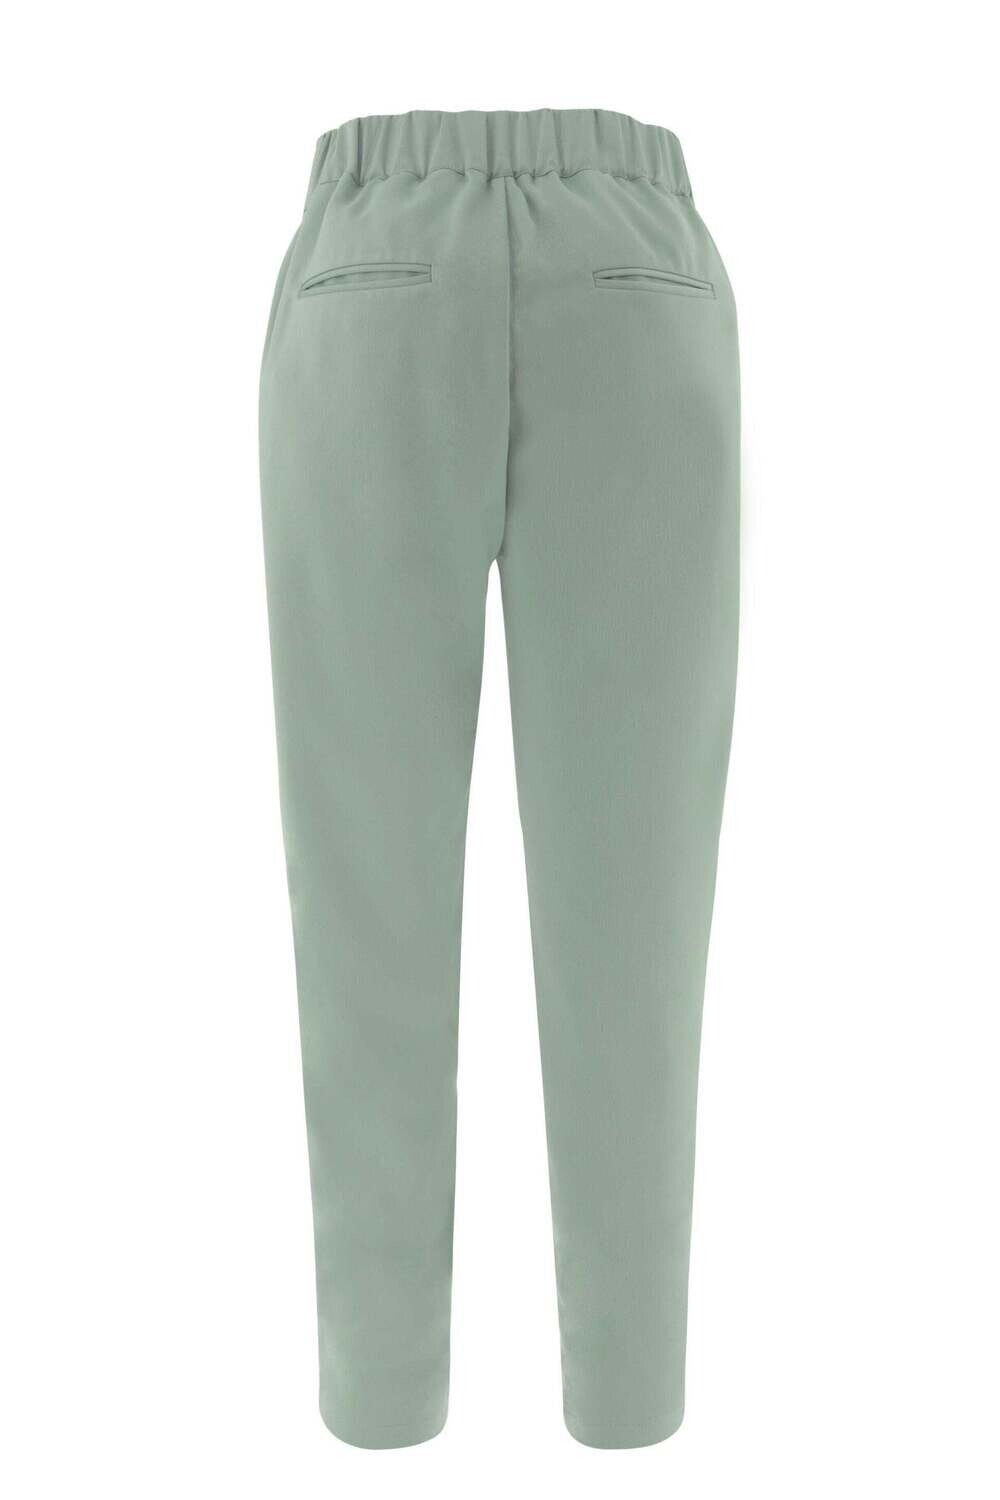 Mint Green Tailored Trousers